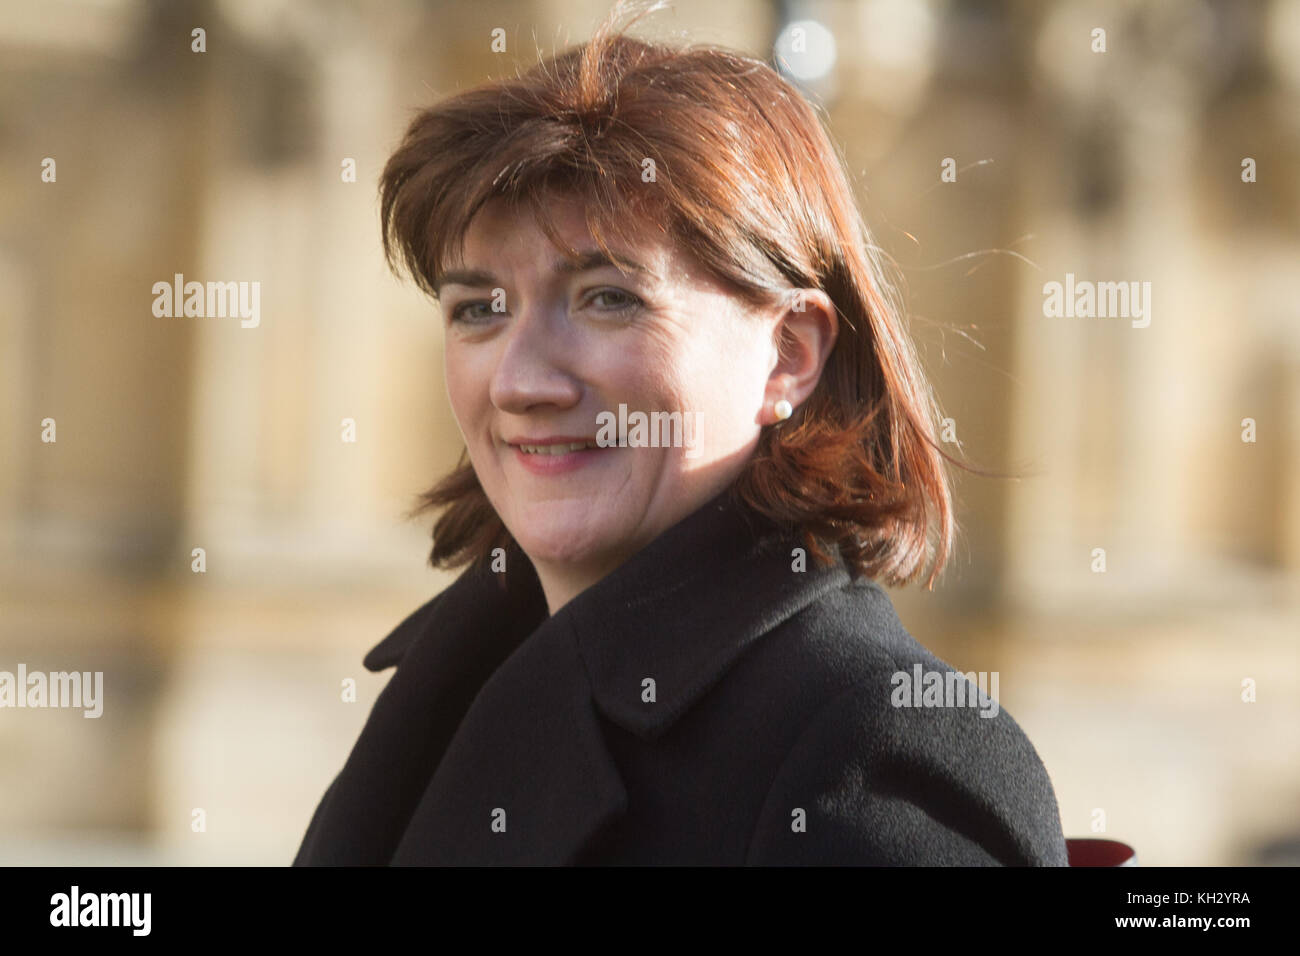 London, UK. 13th Nov, 2017.British Conservative Politician Nicky Morgan a Remain supporter  is seen in Westminster. Nicky Morgan is Member of Parliament for Loughborough and has served as Education Secretary under Prime Minister David Cameron and Minister for Women Equalities   Credit: amer ghazzal/Alamy Live News Stock Photo